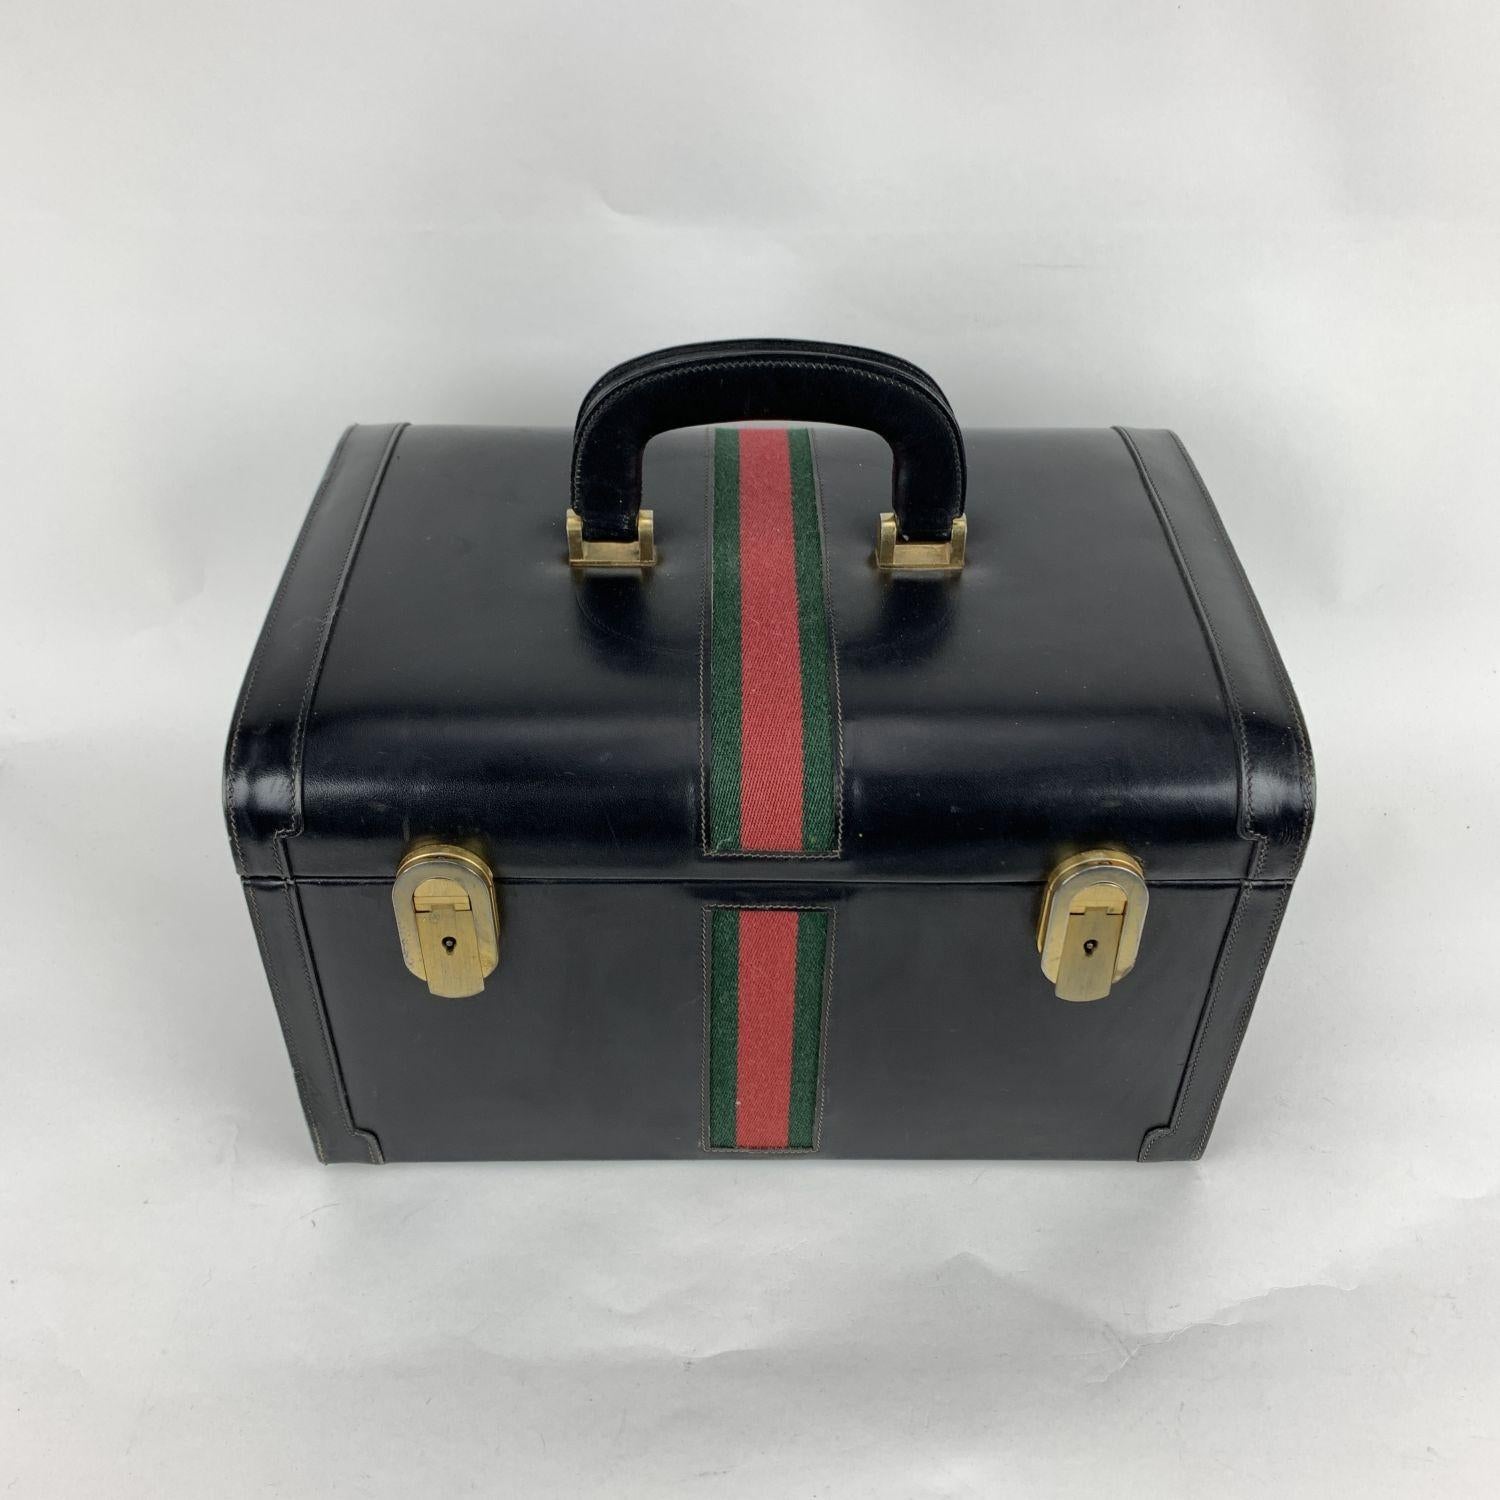 Splendid vintage train case by GUCCI, from the early 1970s. Crafted in black leather. It features green/red/green striped detailing and gold-tone metal hardware. Double key lock closure (keys are included). Beige leather internal lining. 1 removable